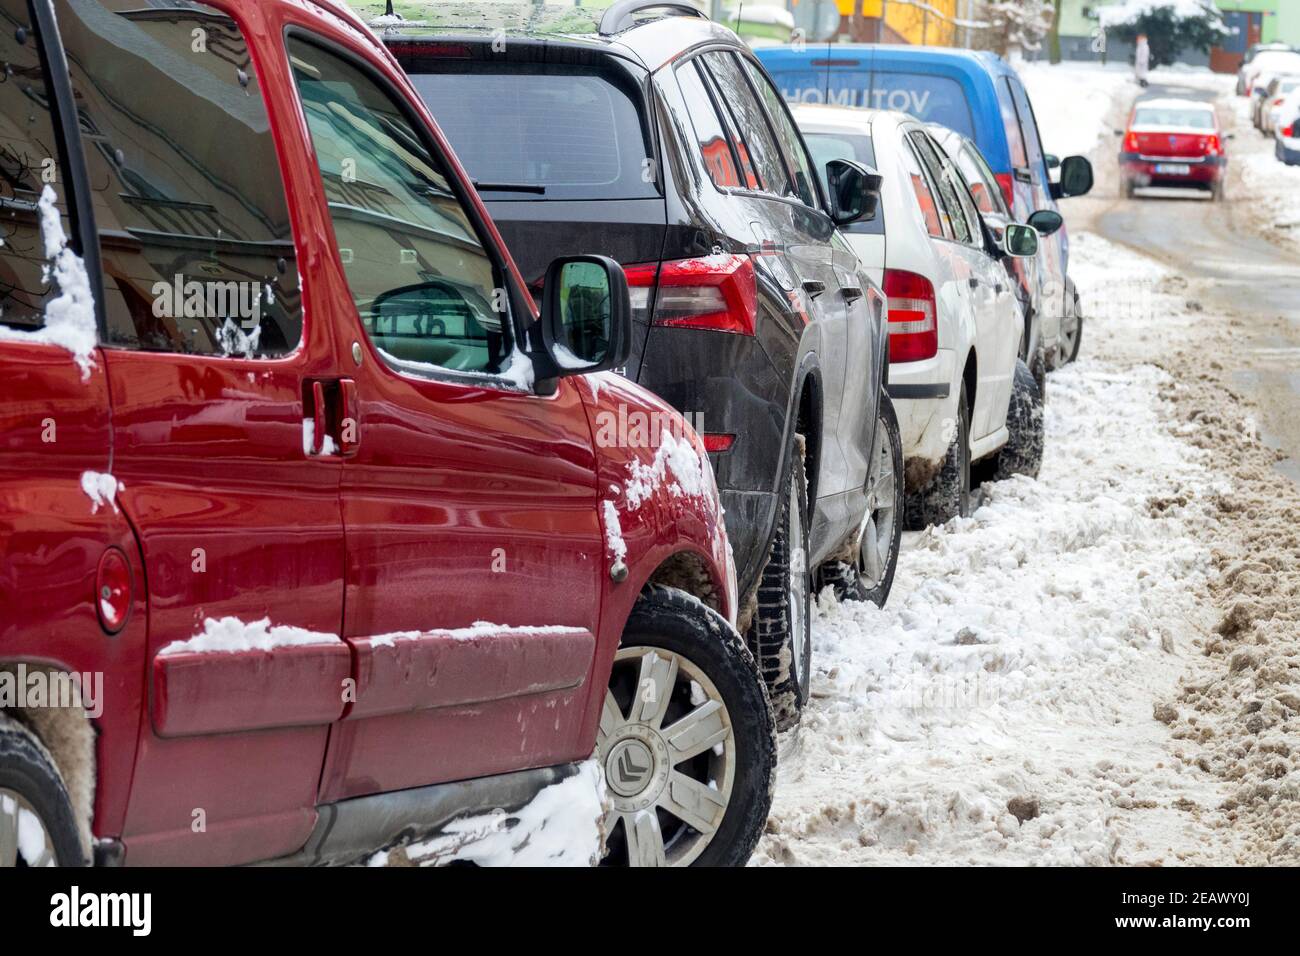 Cars parked in a salty snow street Stock Photo